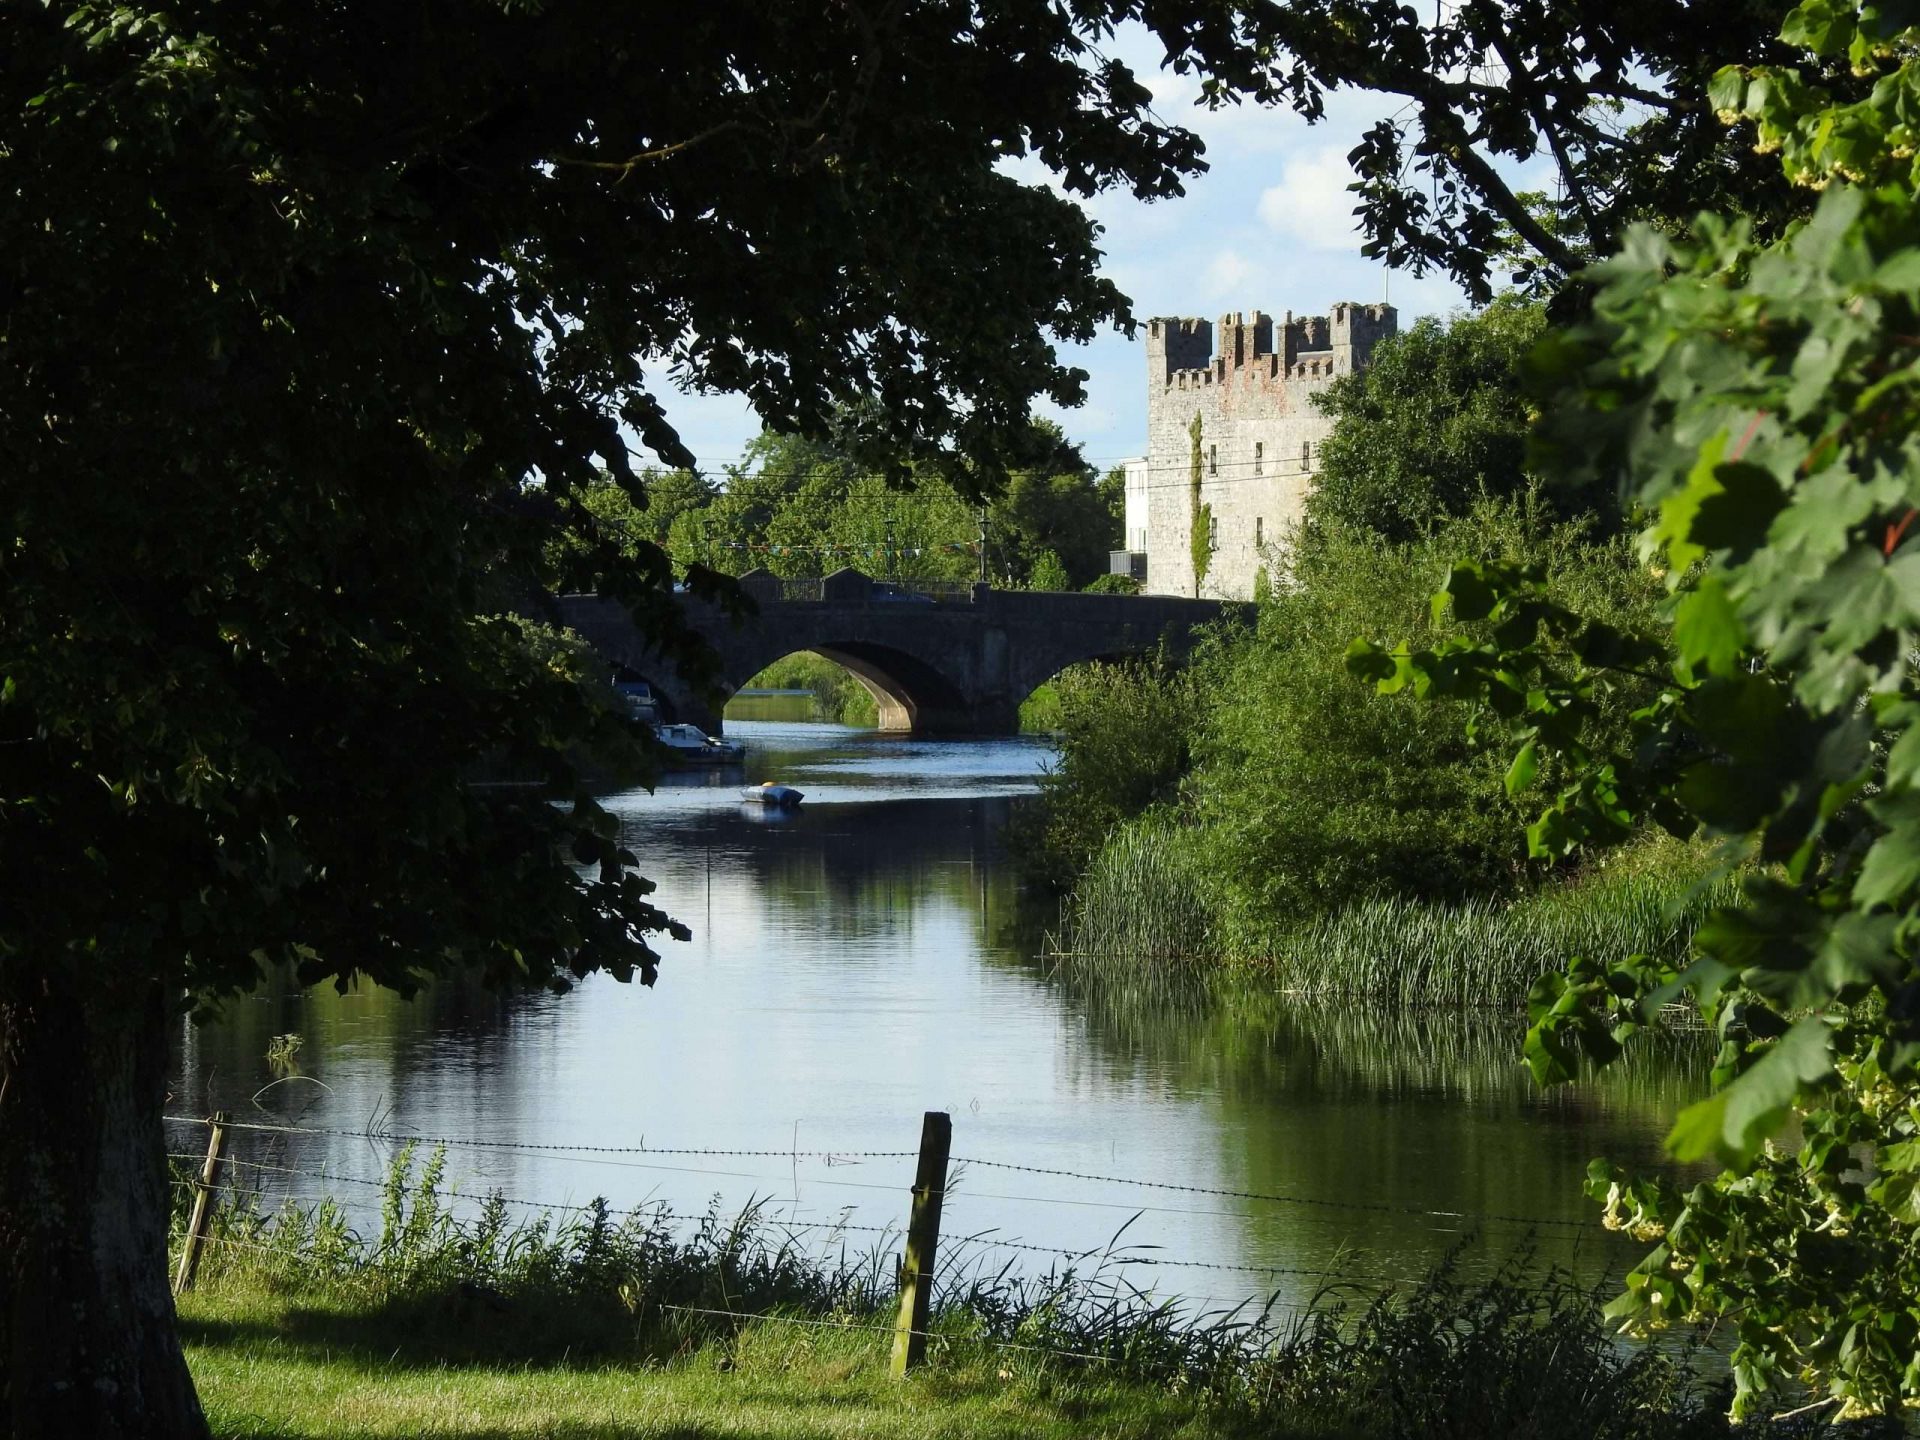 Whites Castle and Cromaboo Bridge on the river Barrow in Athy, Co. Kildare